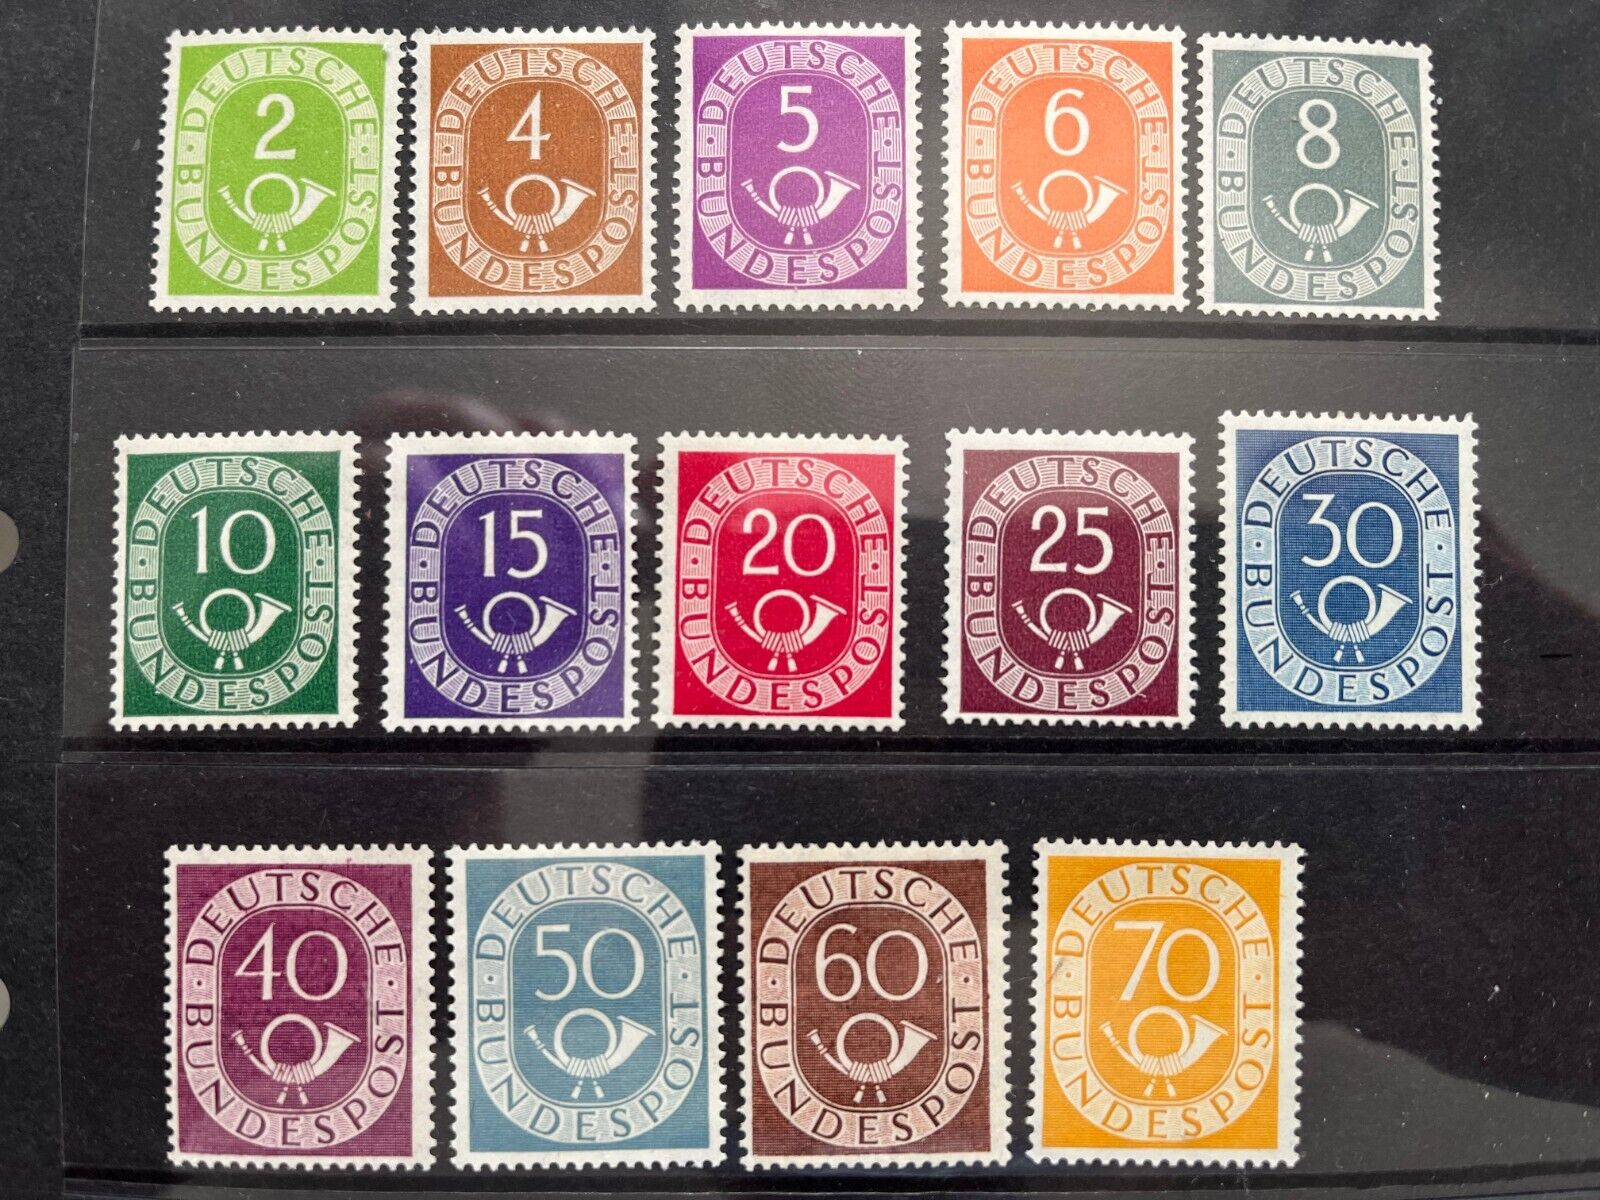 1950 WEST GERMANY STAMPS  POSTHORN SERIES TO 70pf  MINT HINGED  IC56